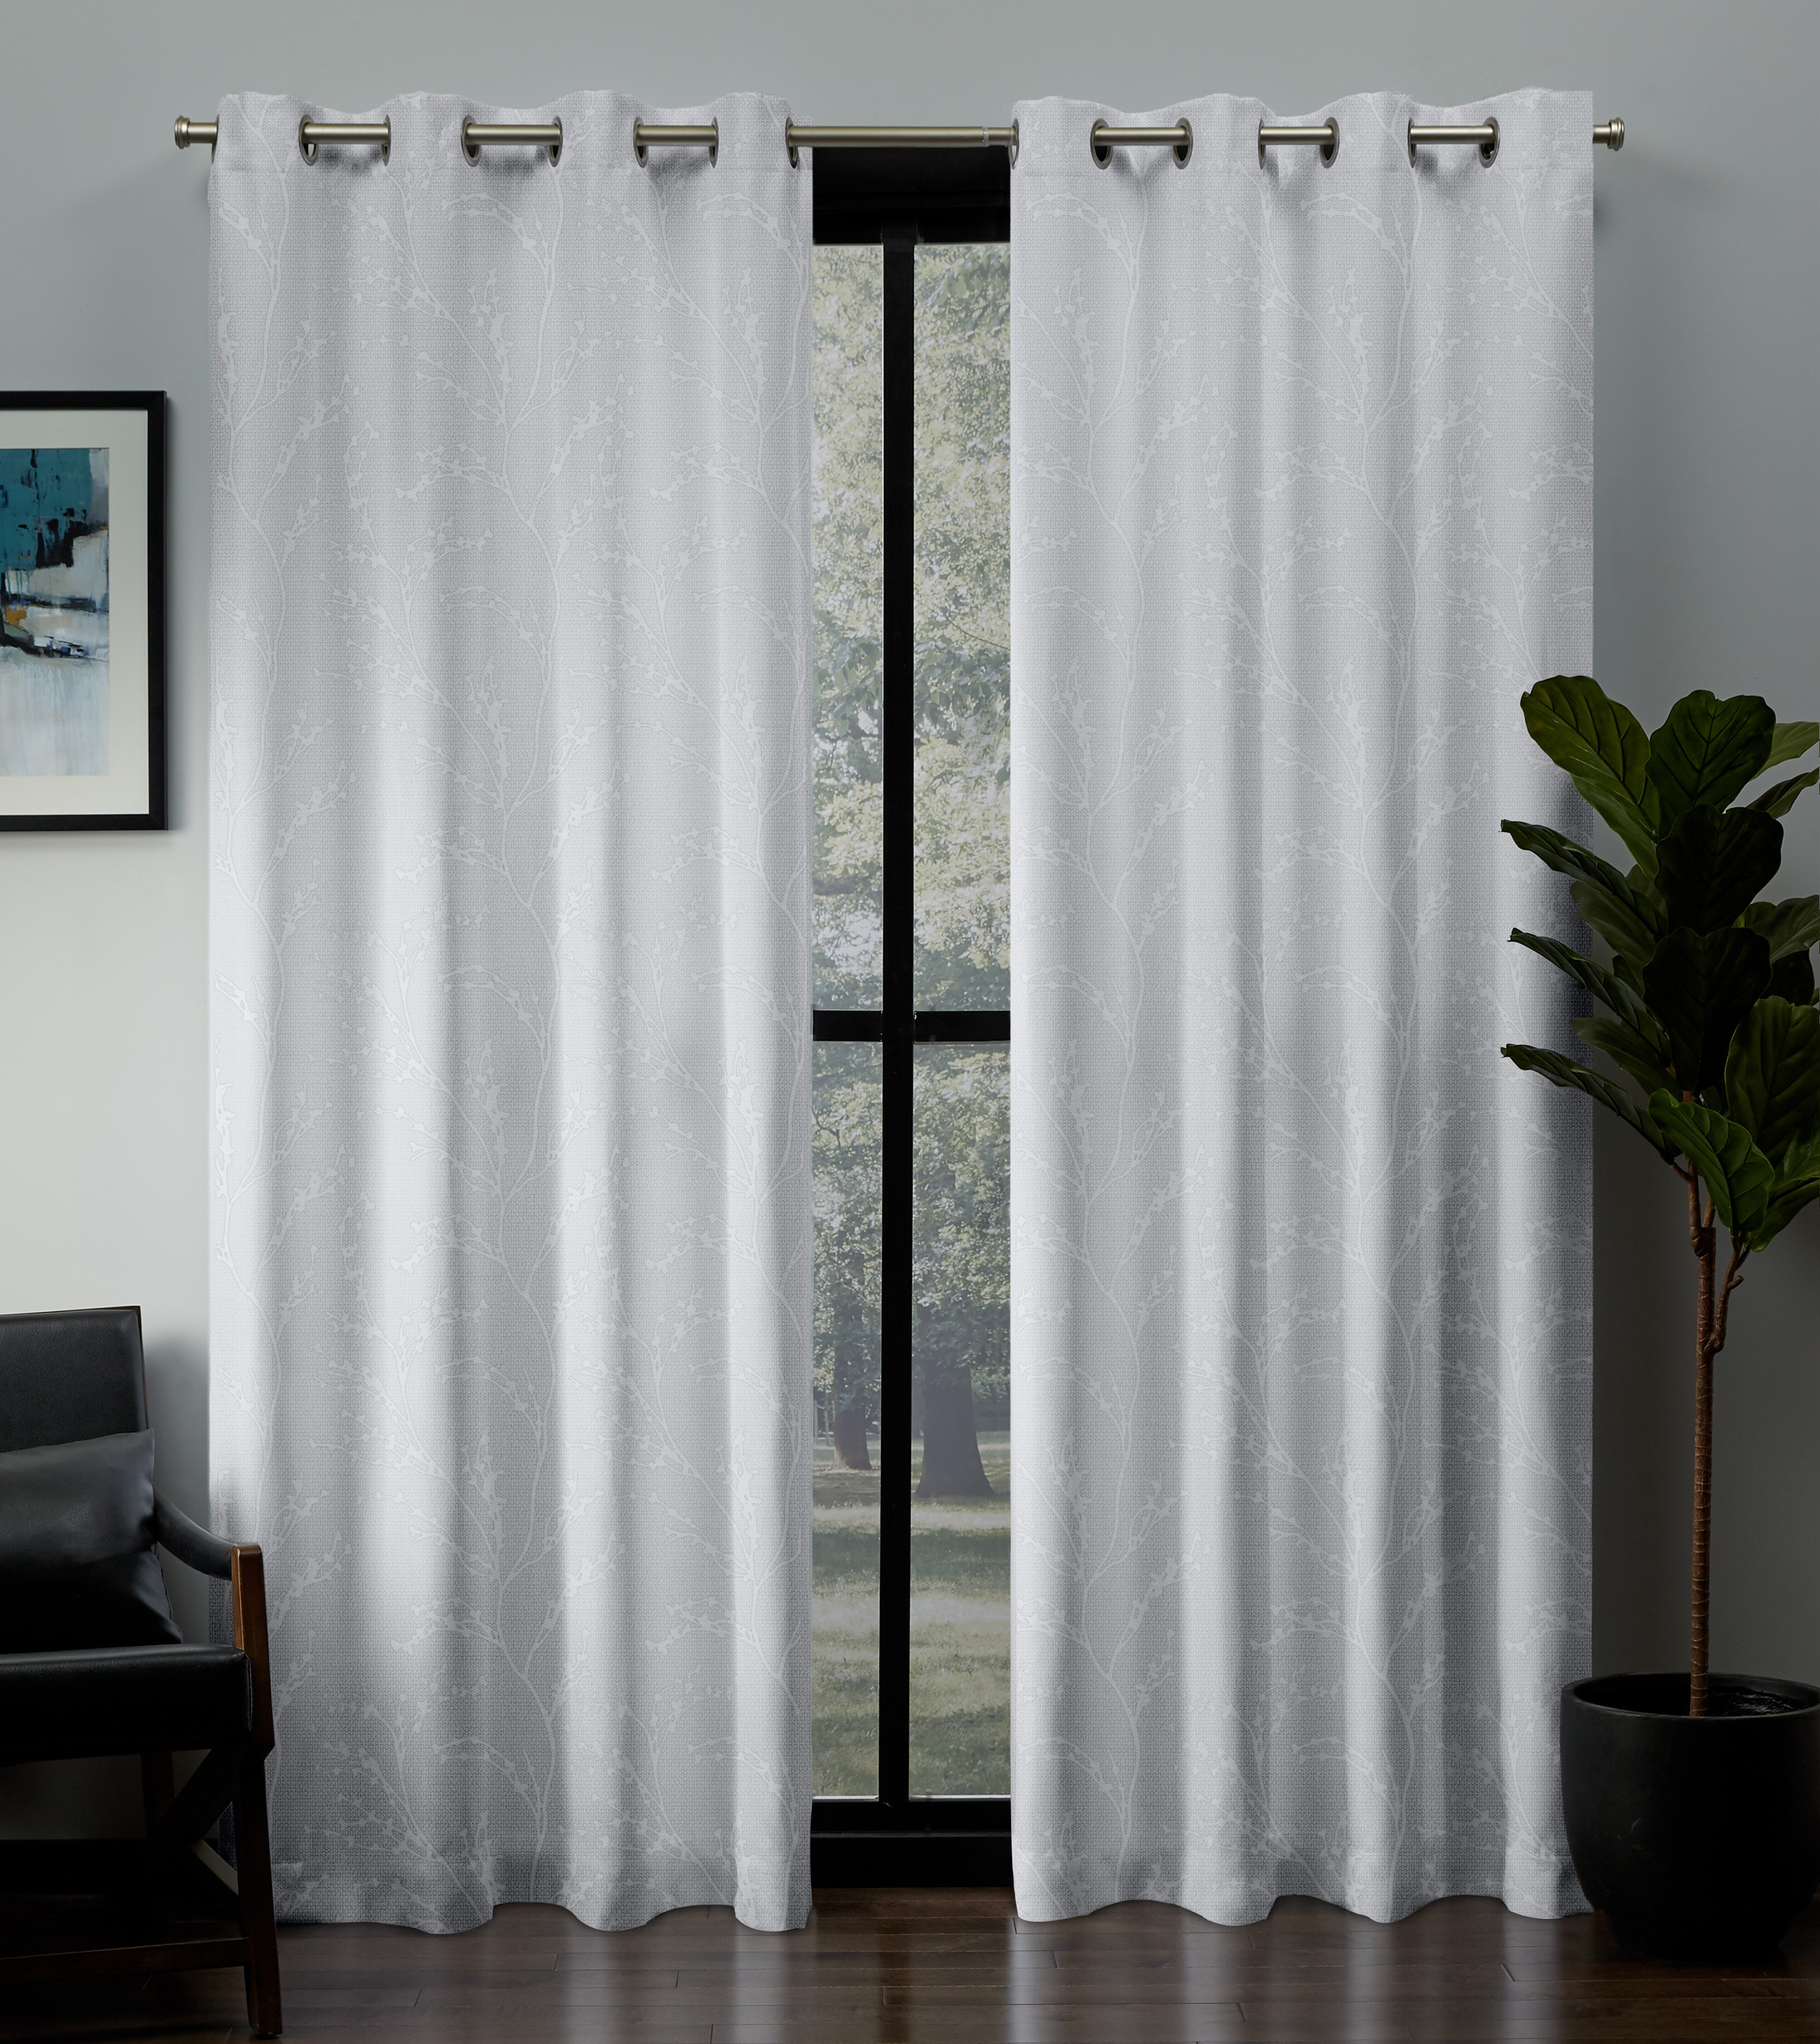 Adult Rustic / Lodge Curtains & Drapes You'll Love